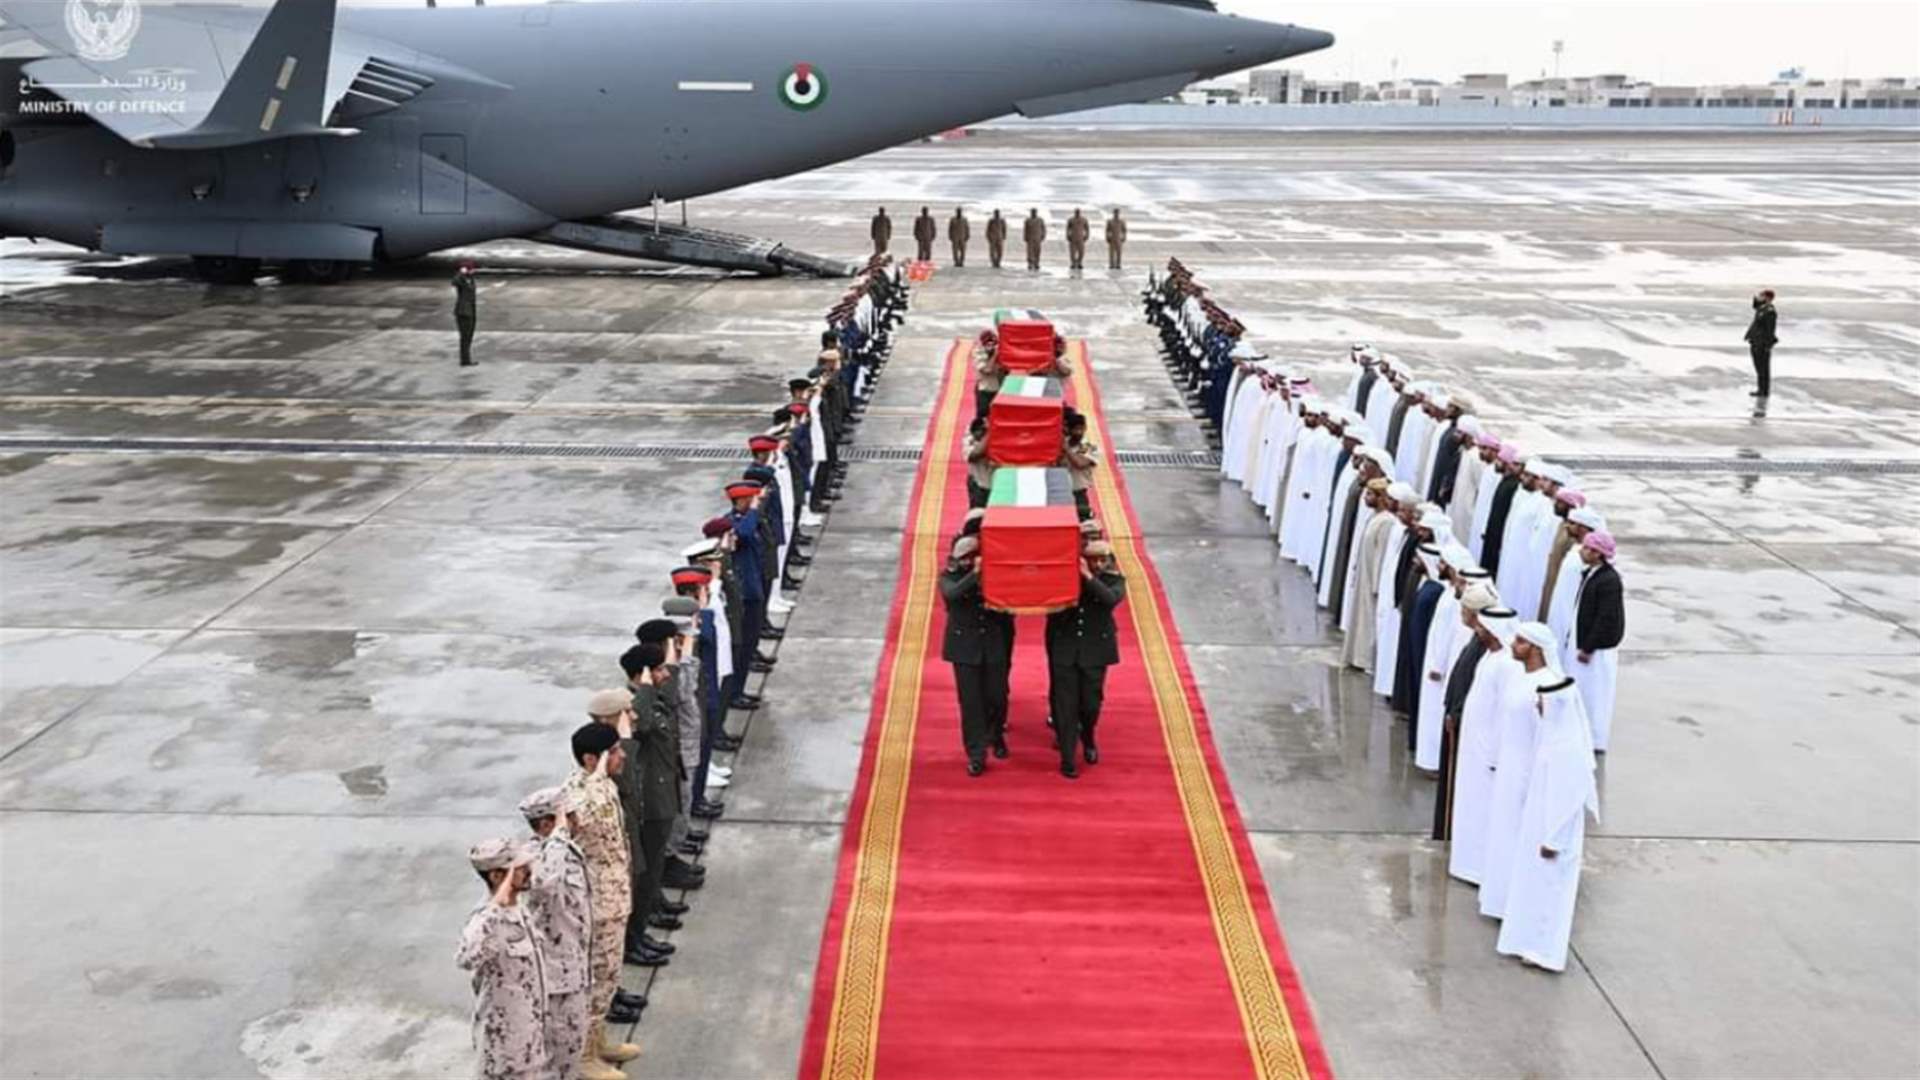 Strategic location: What is the role of the UAE in Somalia?